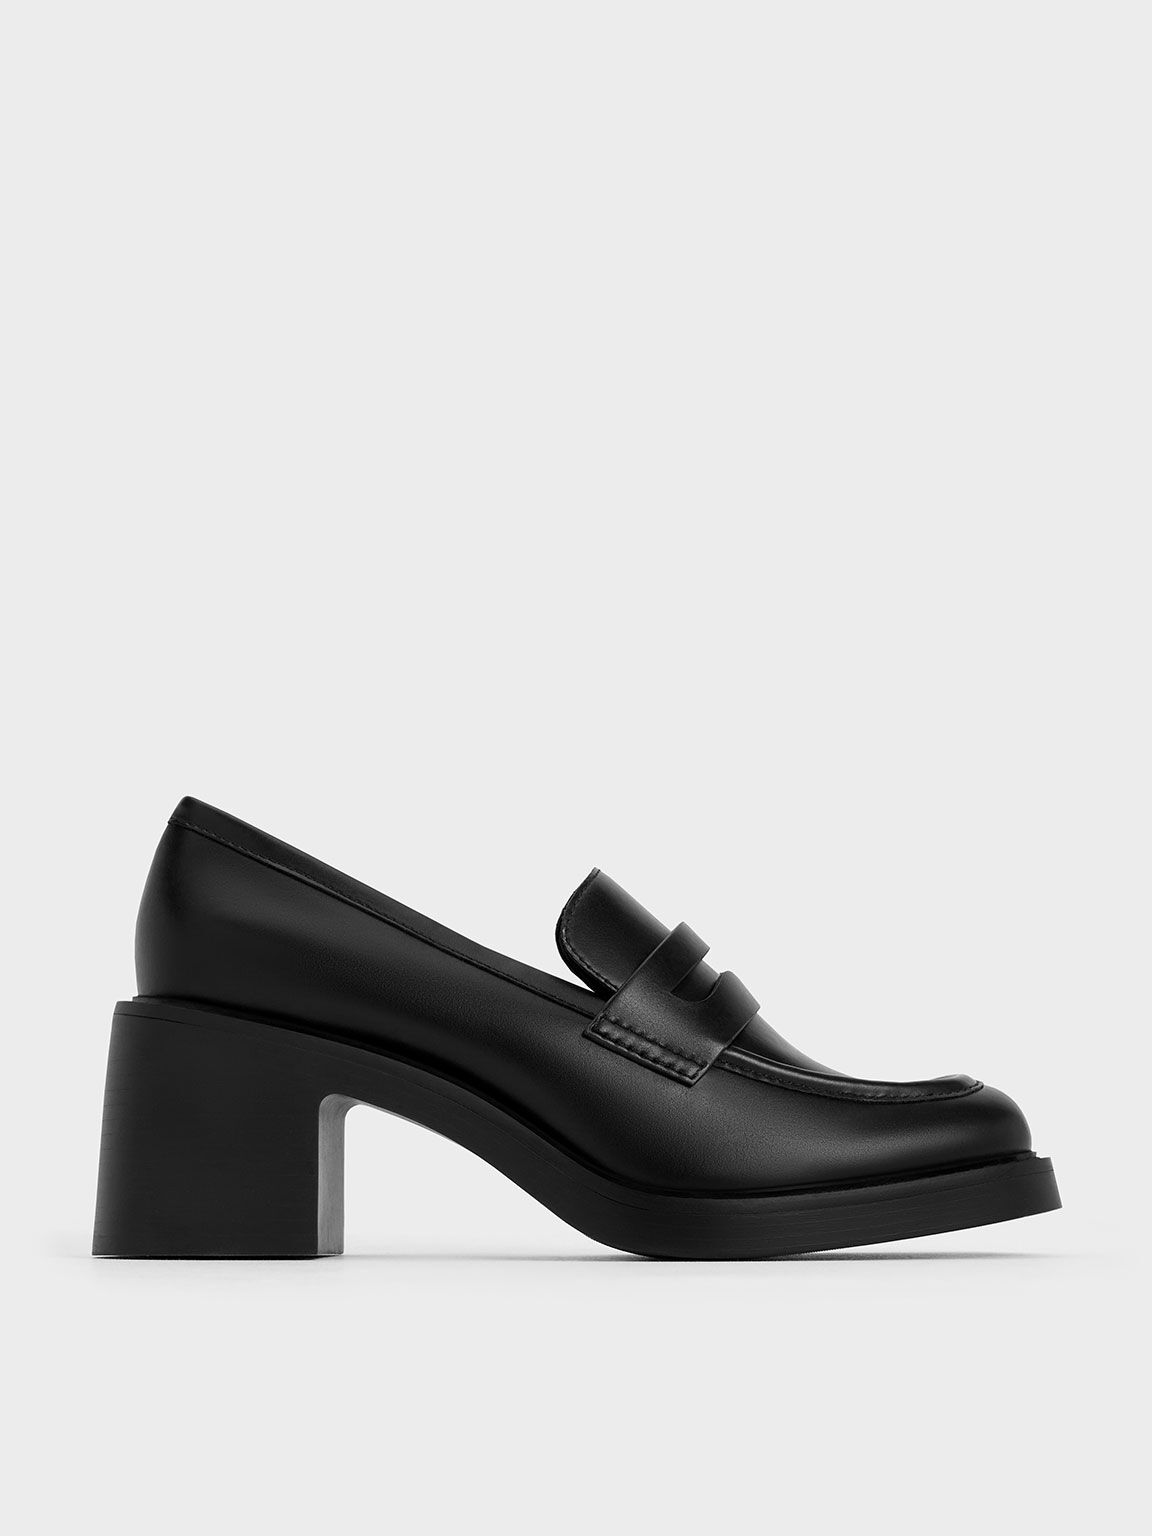 Women's Loafers | Shop Exclusive Styles | CHARLES & KEITH US